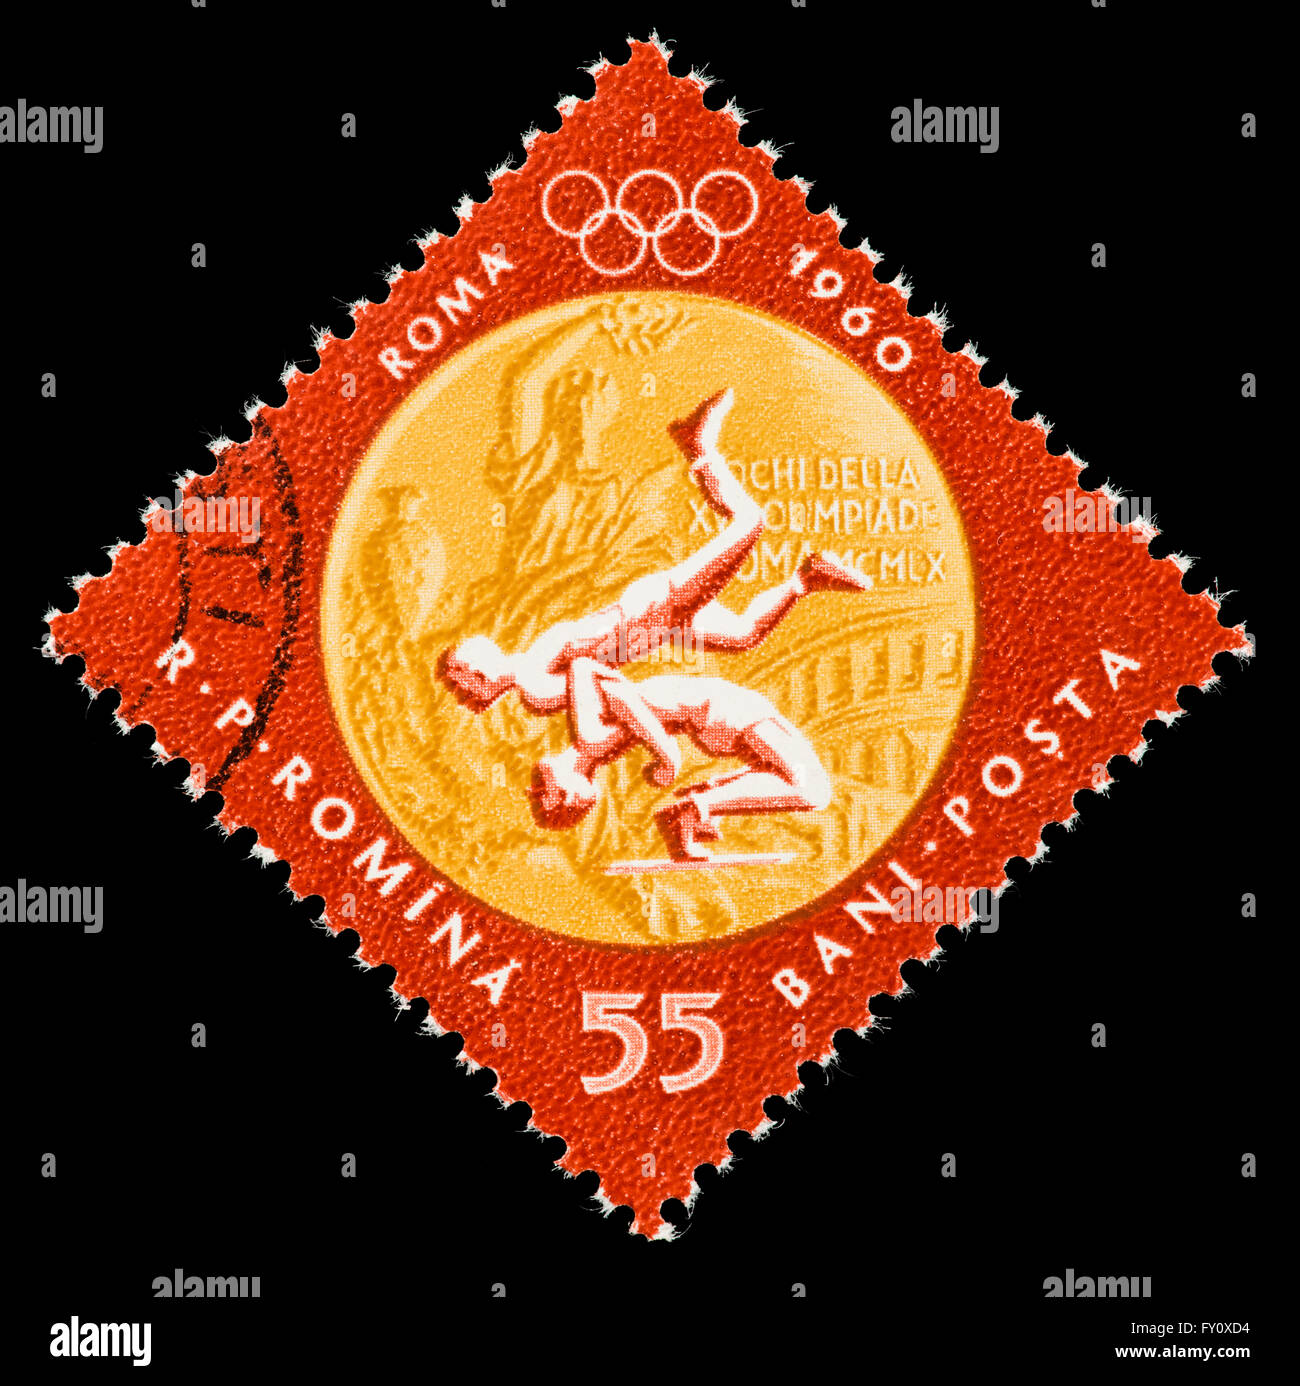 Postage stamp from Romania depicting wrestling and gold medal from the 1960 Rome Summer Olympic Games. Stock Photo